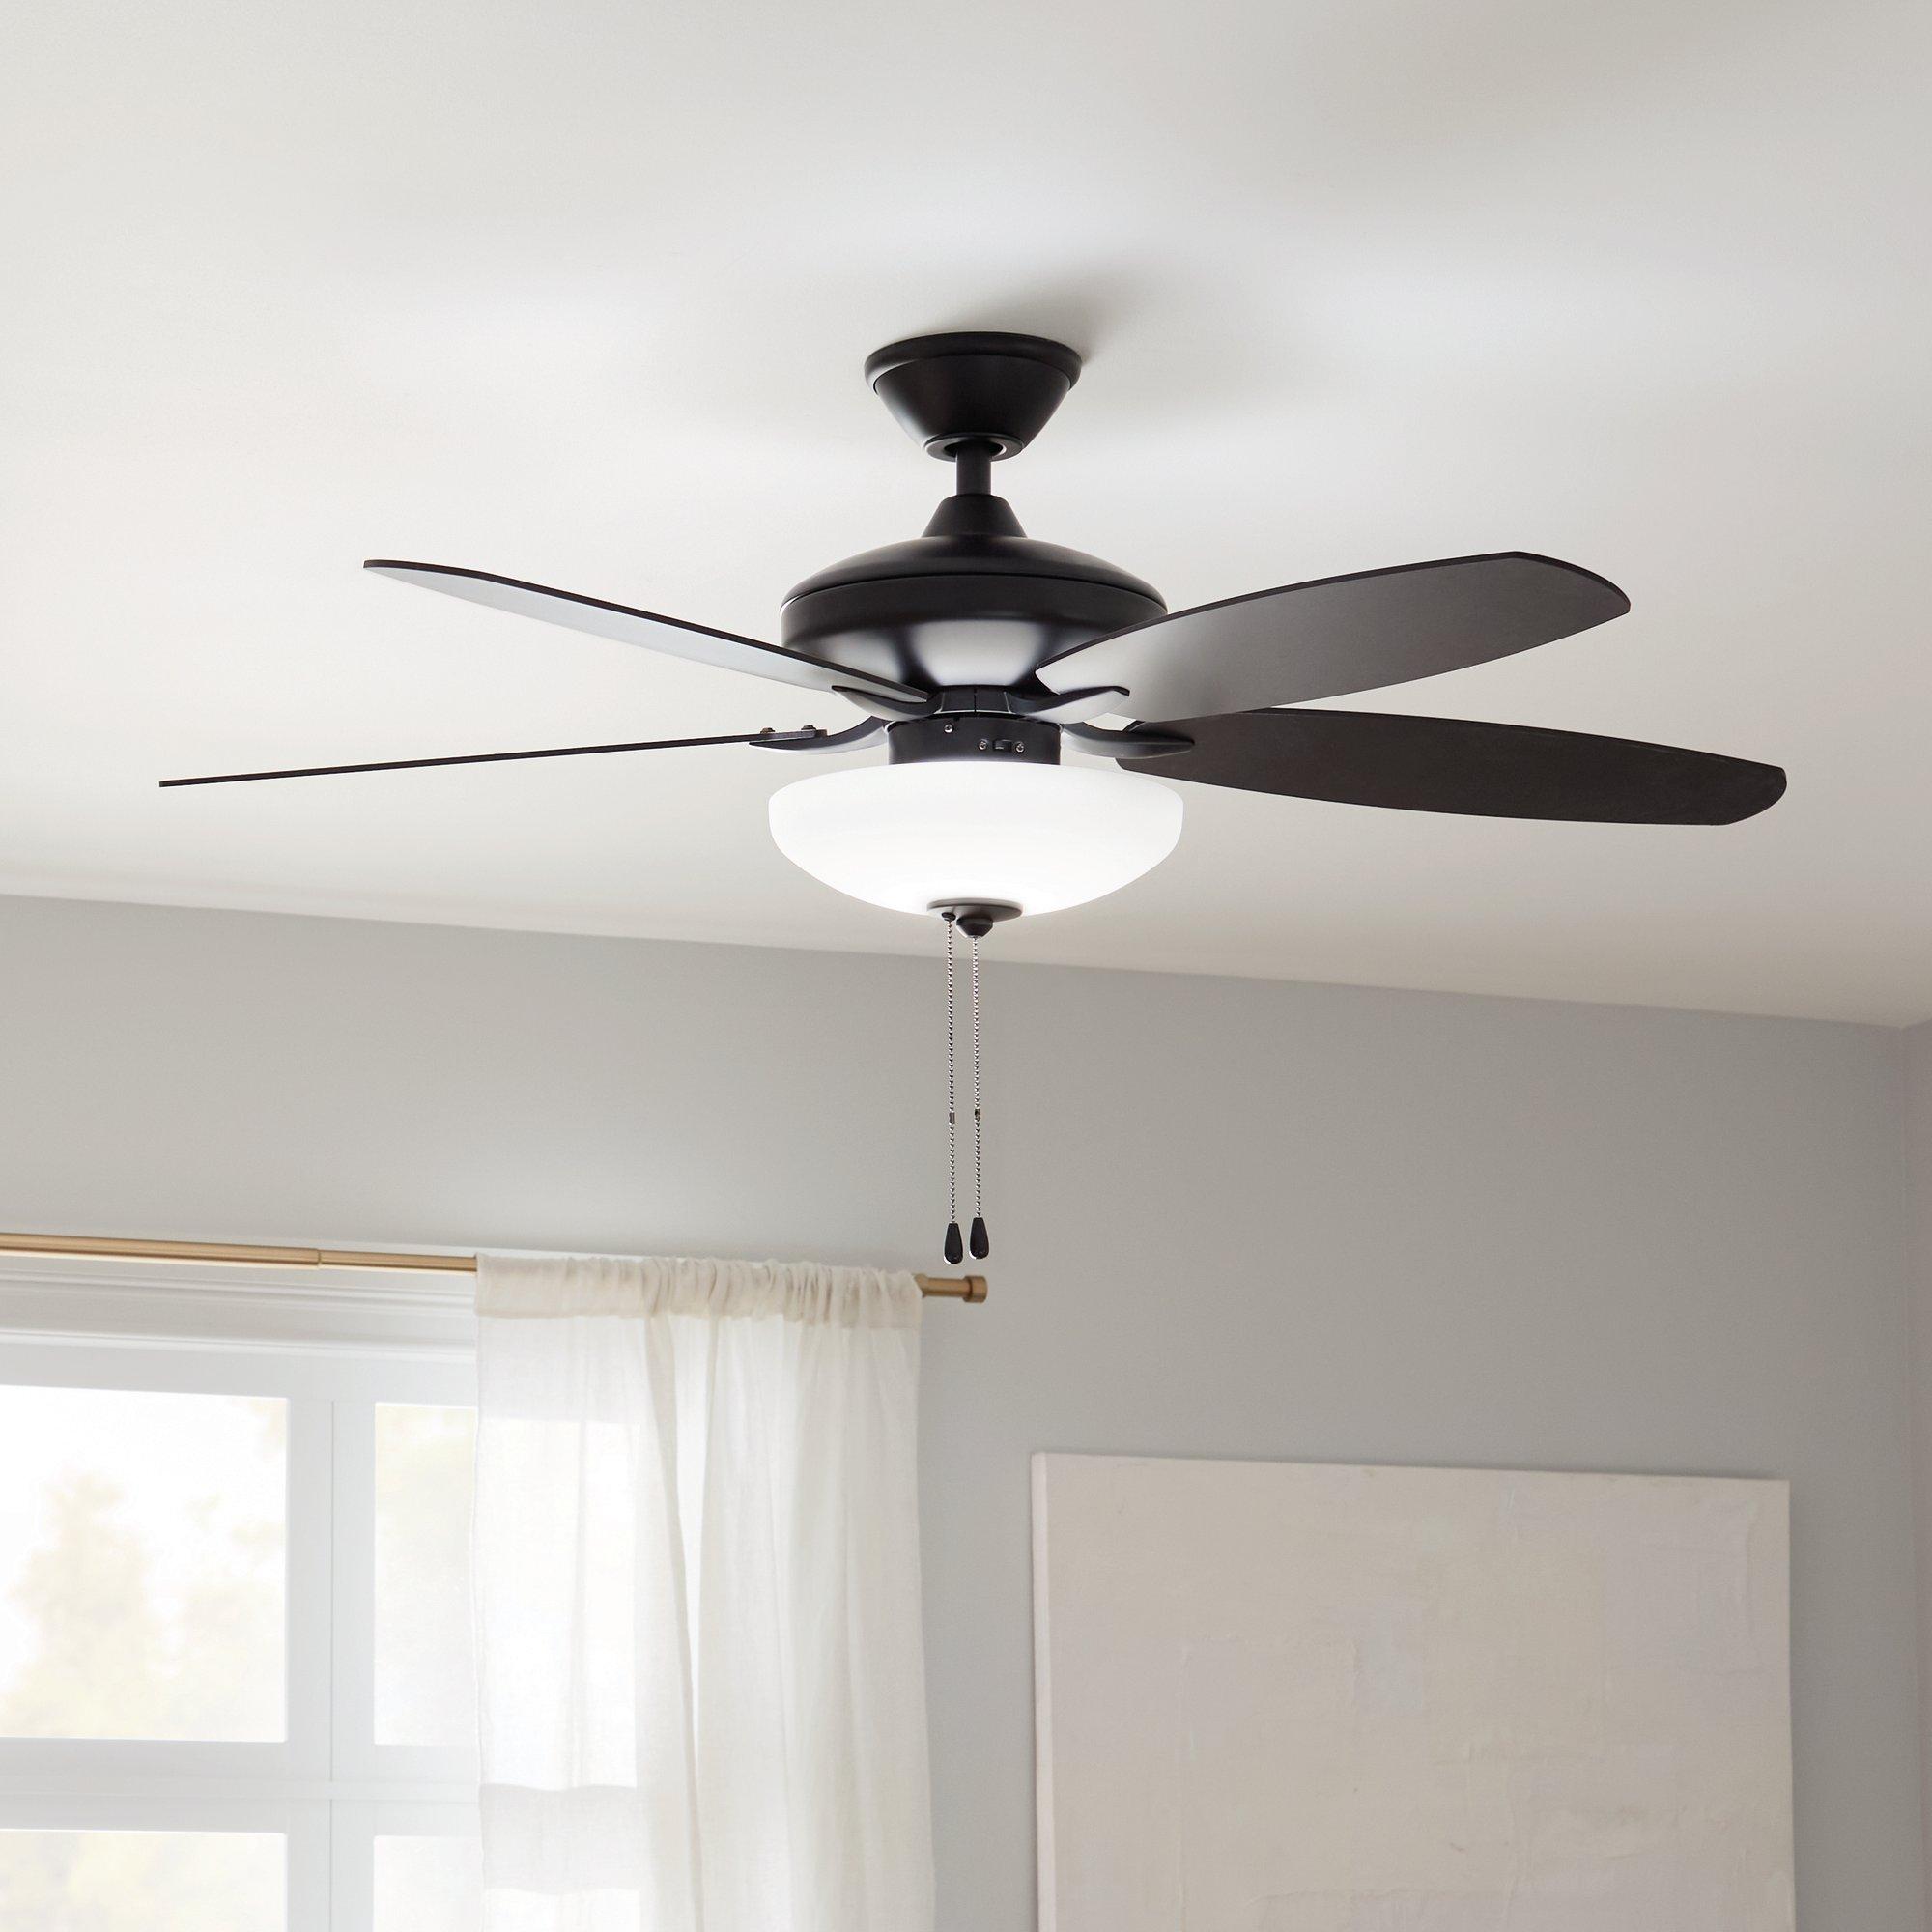 A residential ceiling fan with an LED light bowl hangs in a living room.